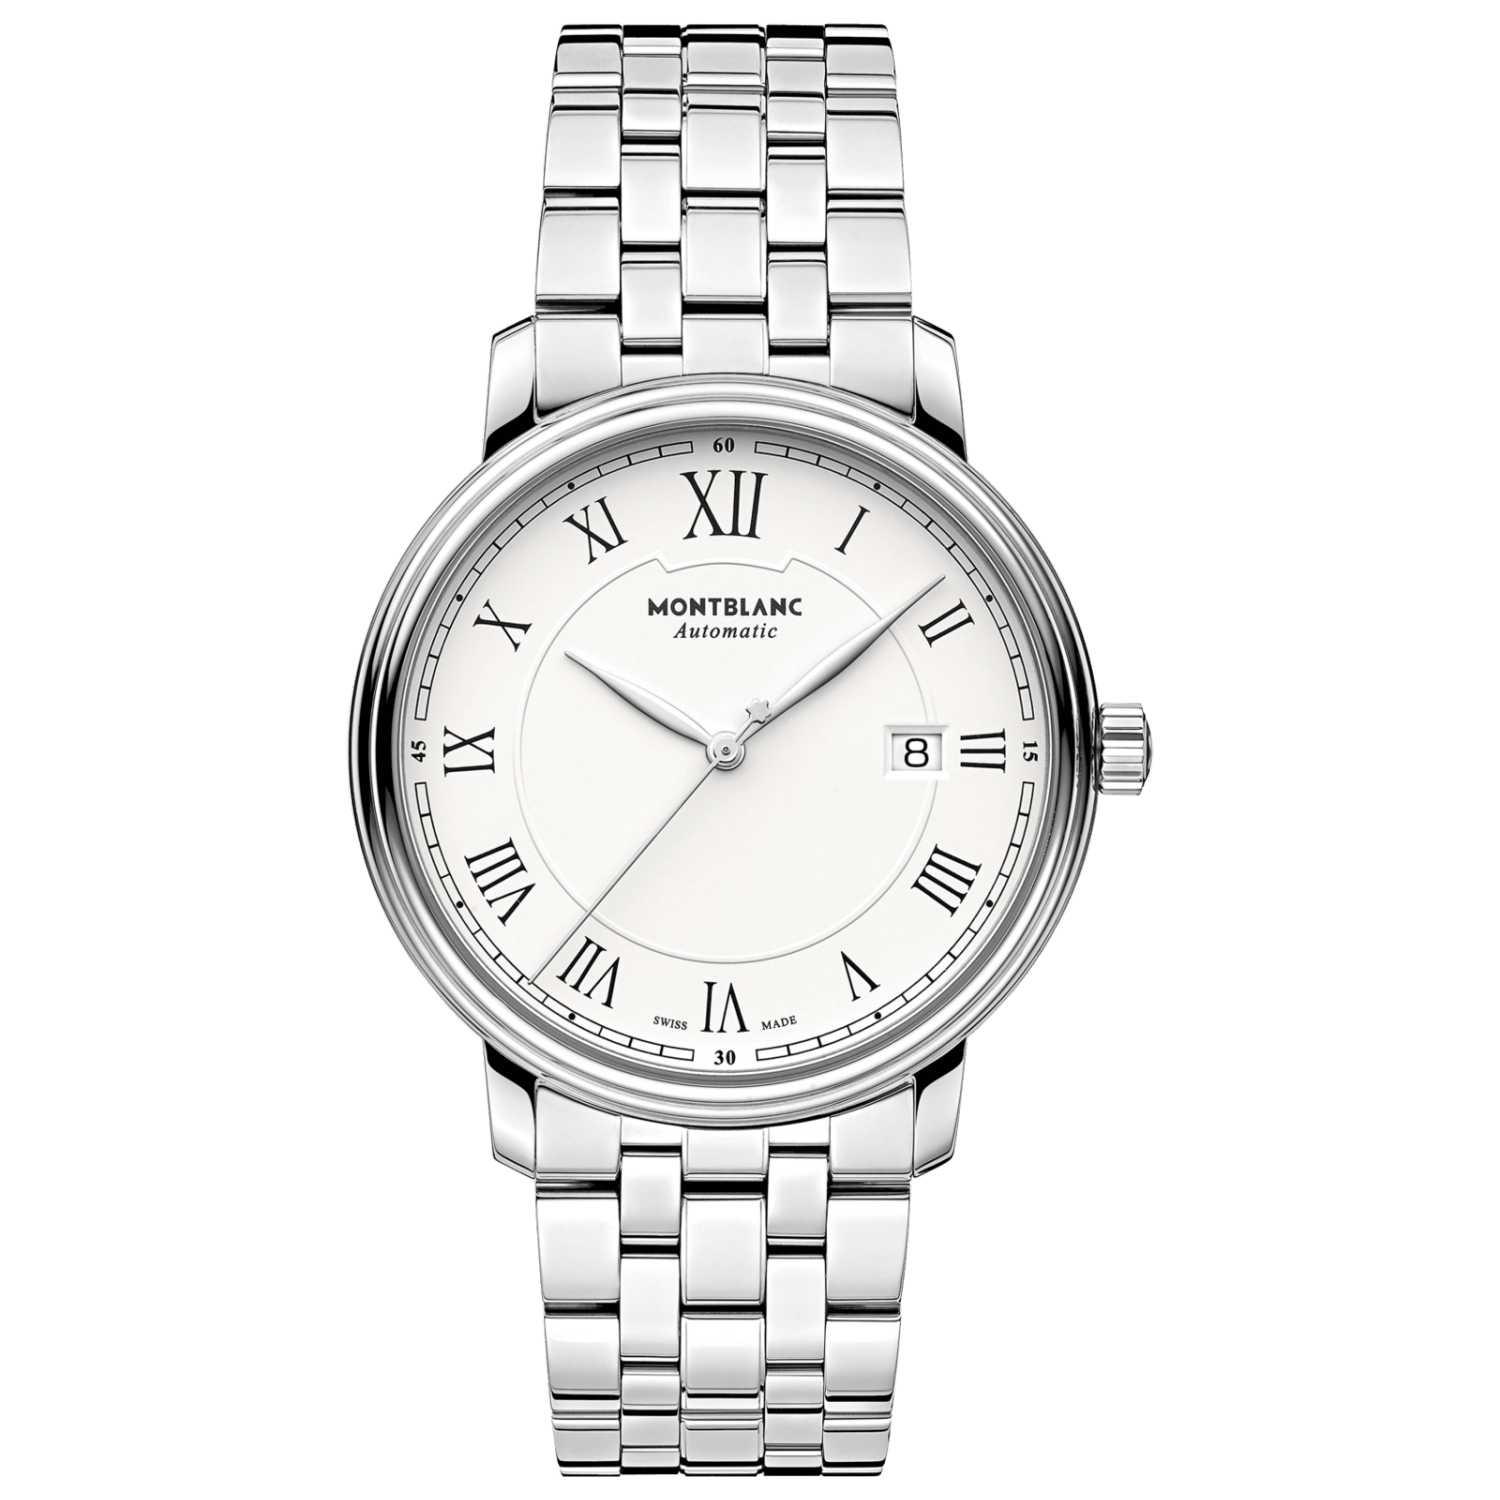 Montblanc Tradition Automatic Men's Watch - 112610